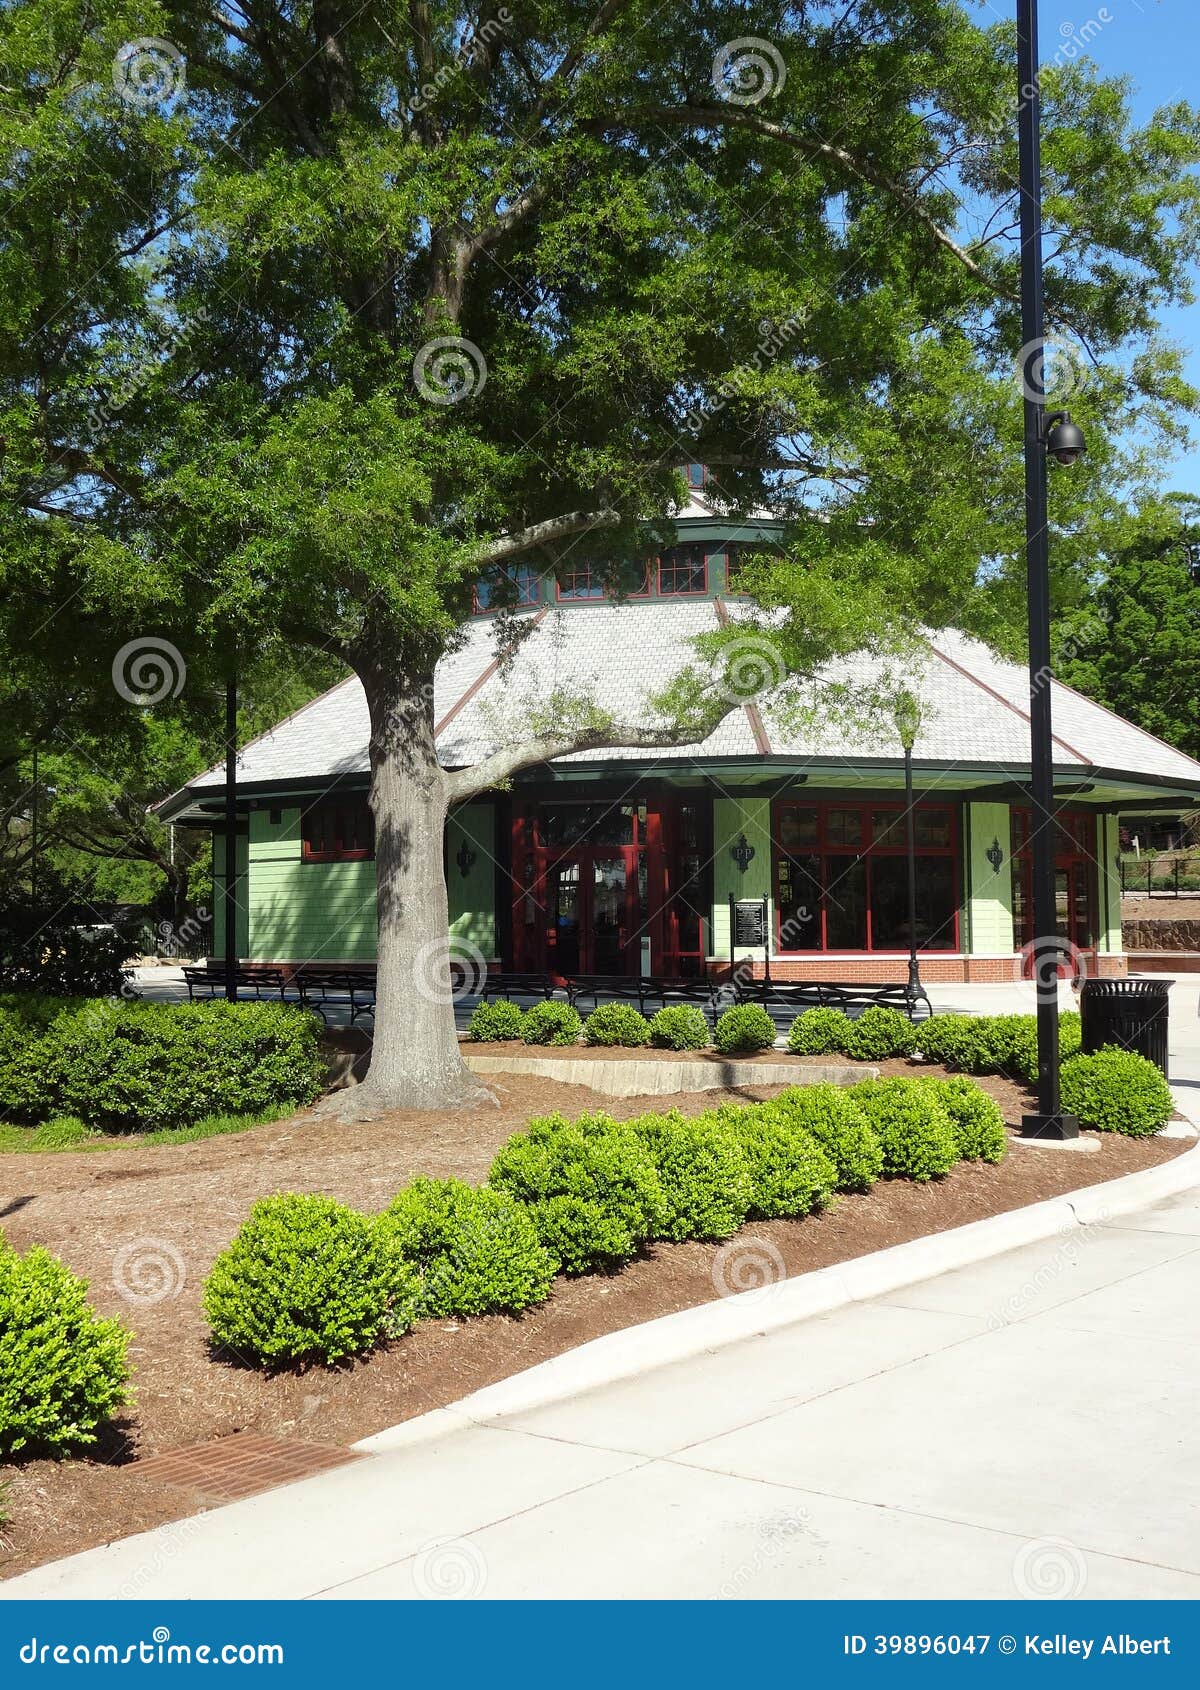 Carousel Building At Pullen Park In Raleigh North Carolina Editorial Photography Image Of Carousel Building 39896047